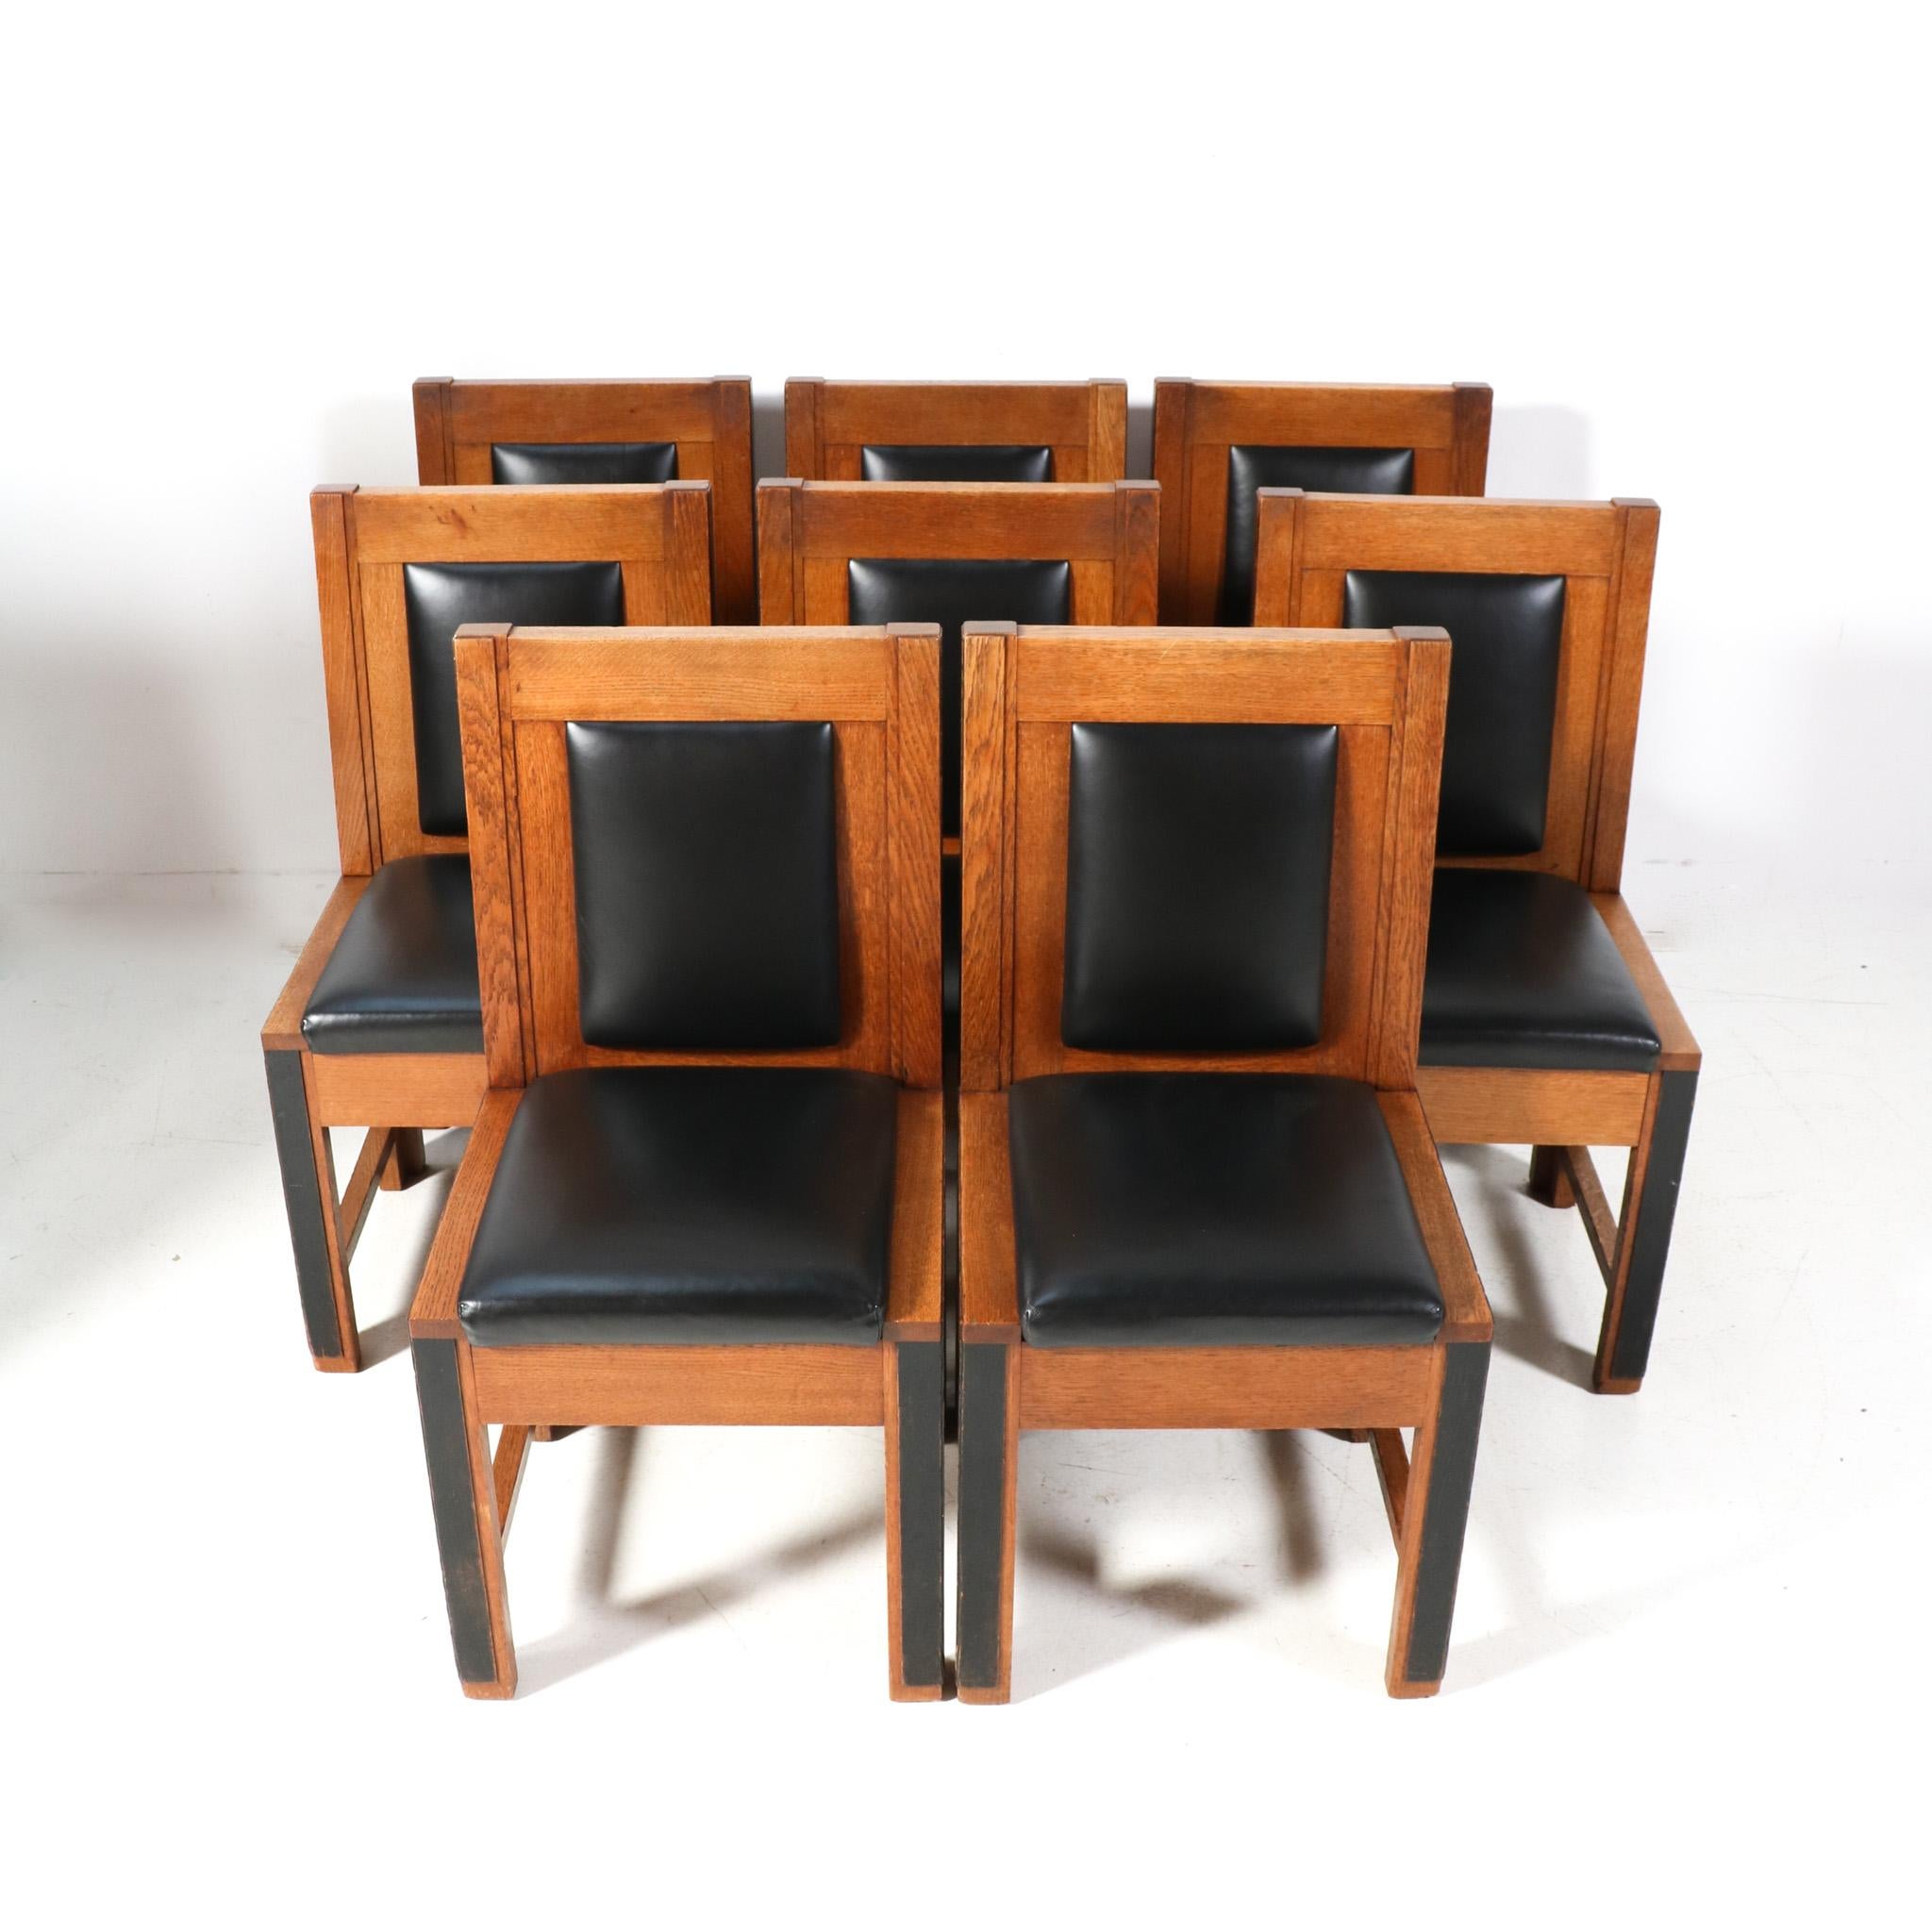 Magnificent and rare set of eight Art Deco Modernist chairs.
This set of eight was designed and manufactured by Fa. Randoe Haarlem for the City Hall of Haarlem.
Striking Dutch design from the 1920s.
Solid oak frames with original black lacquered